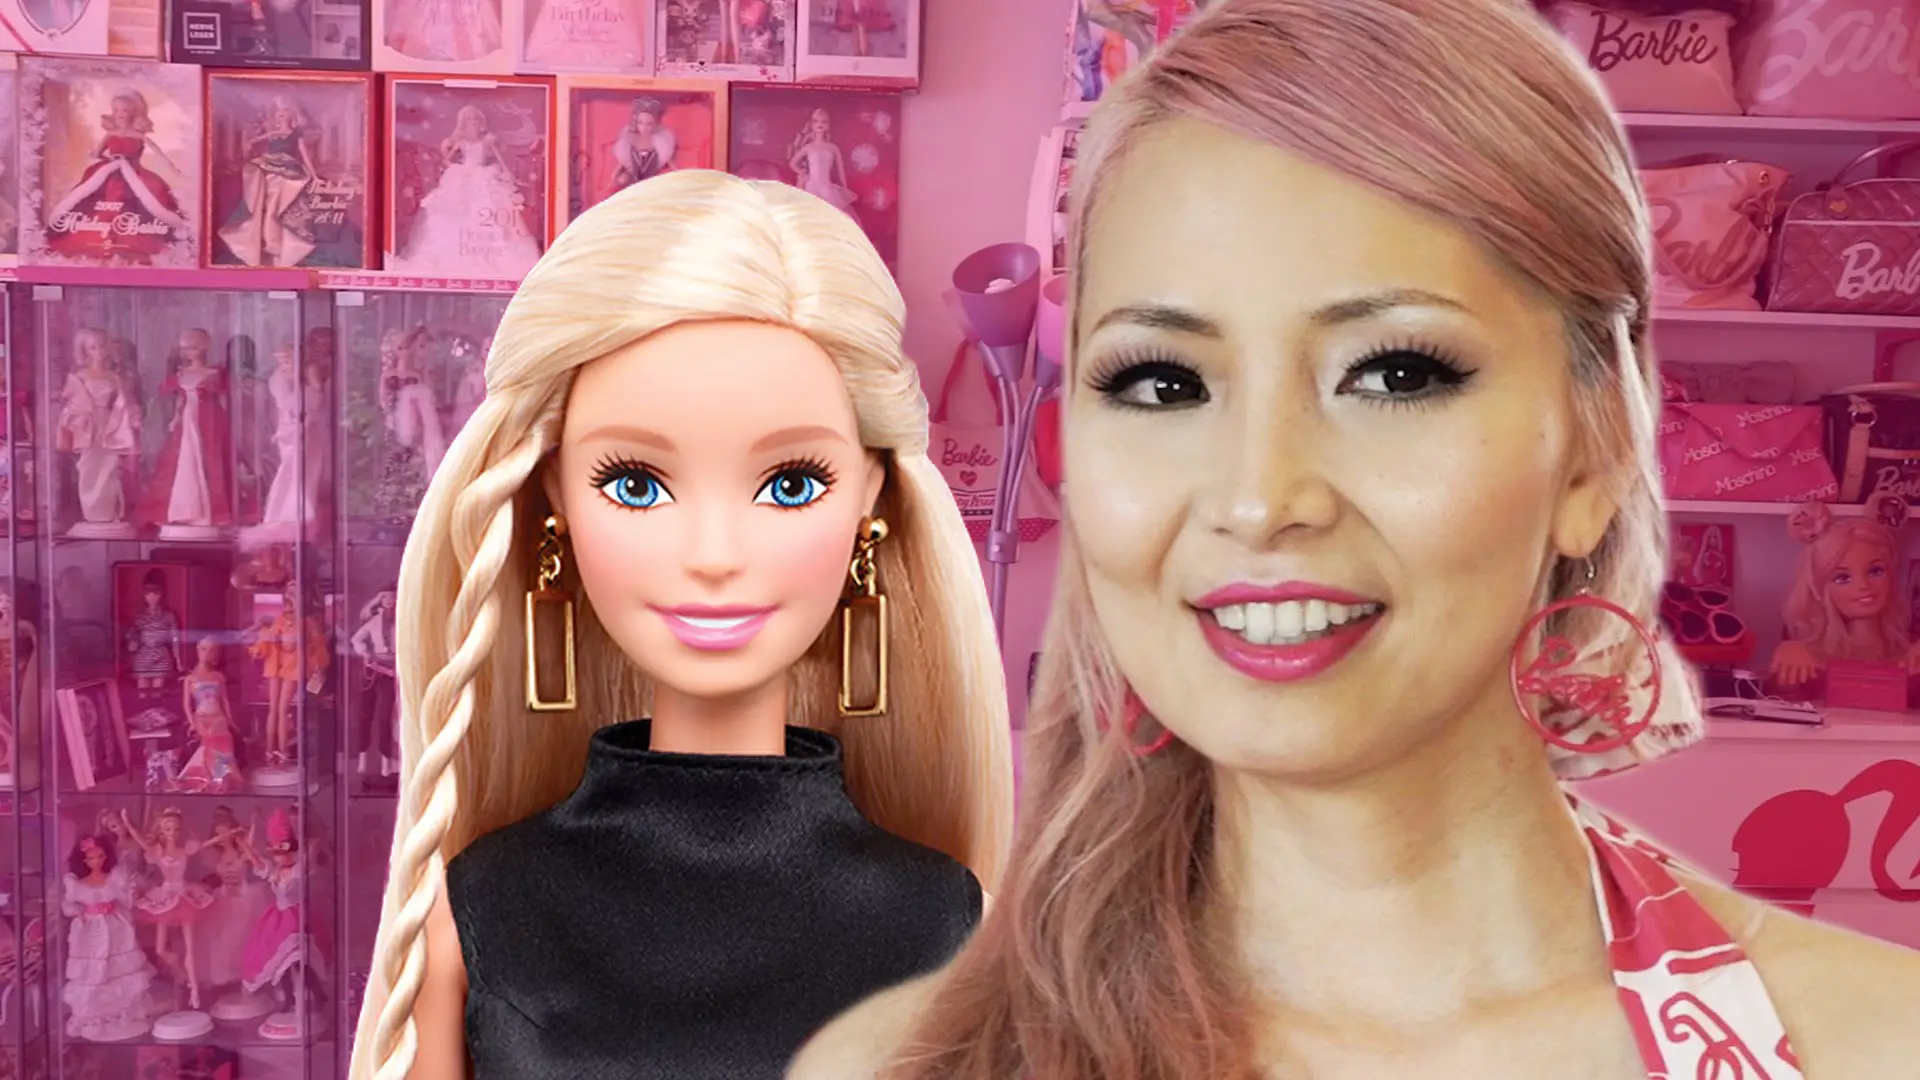 The best Barbie dolls and playsets that your child will love to play with